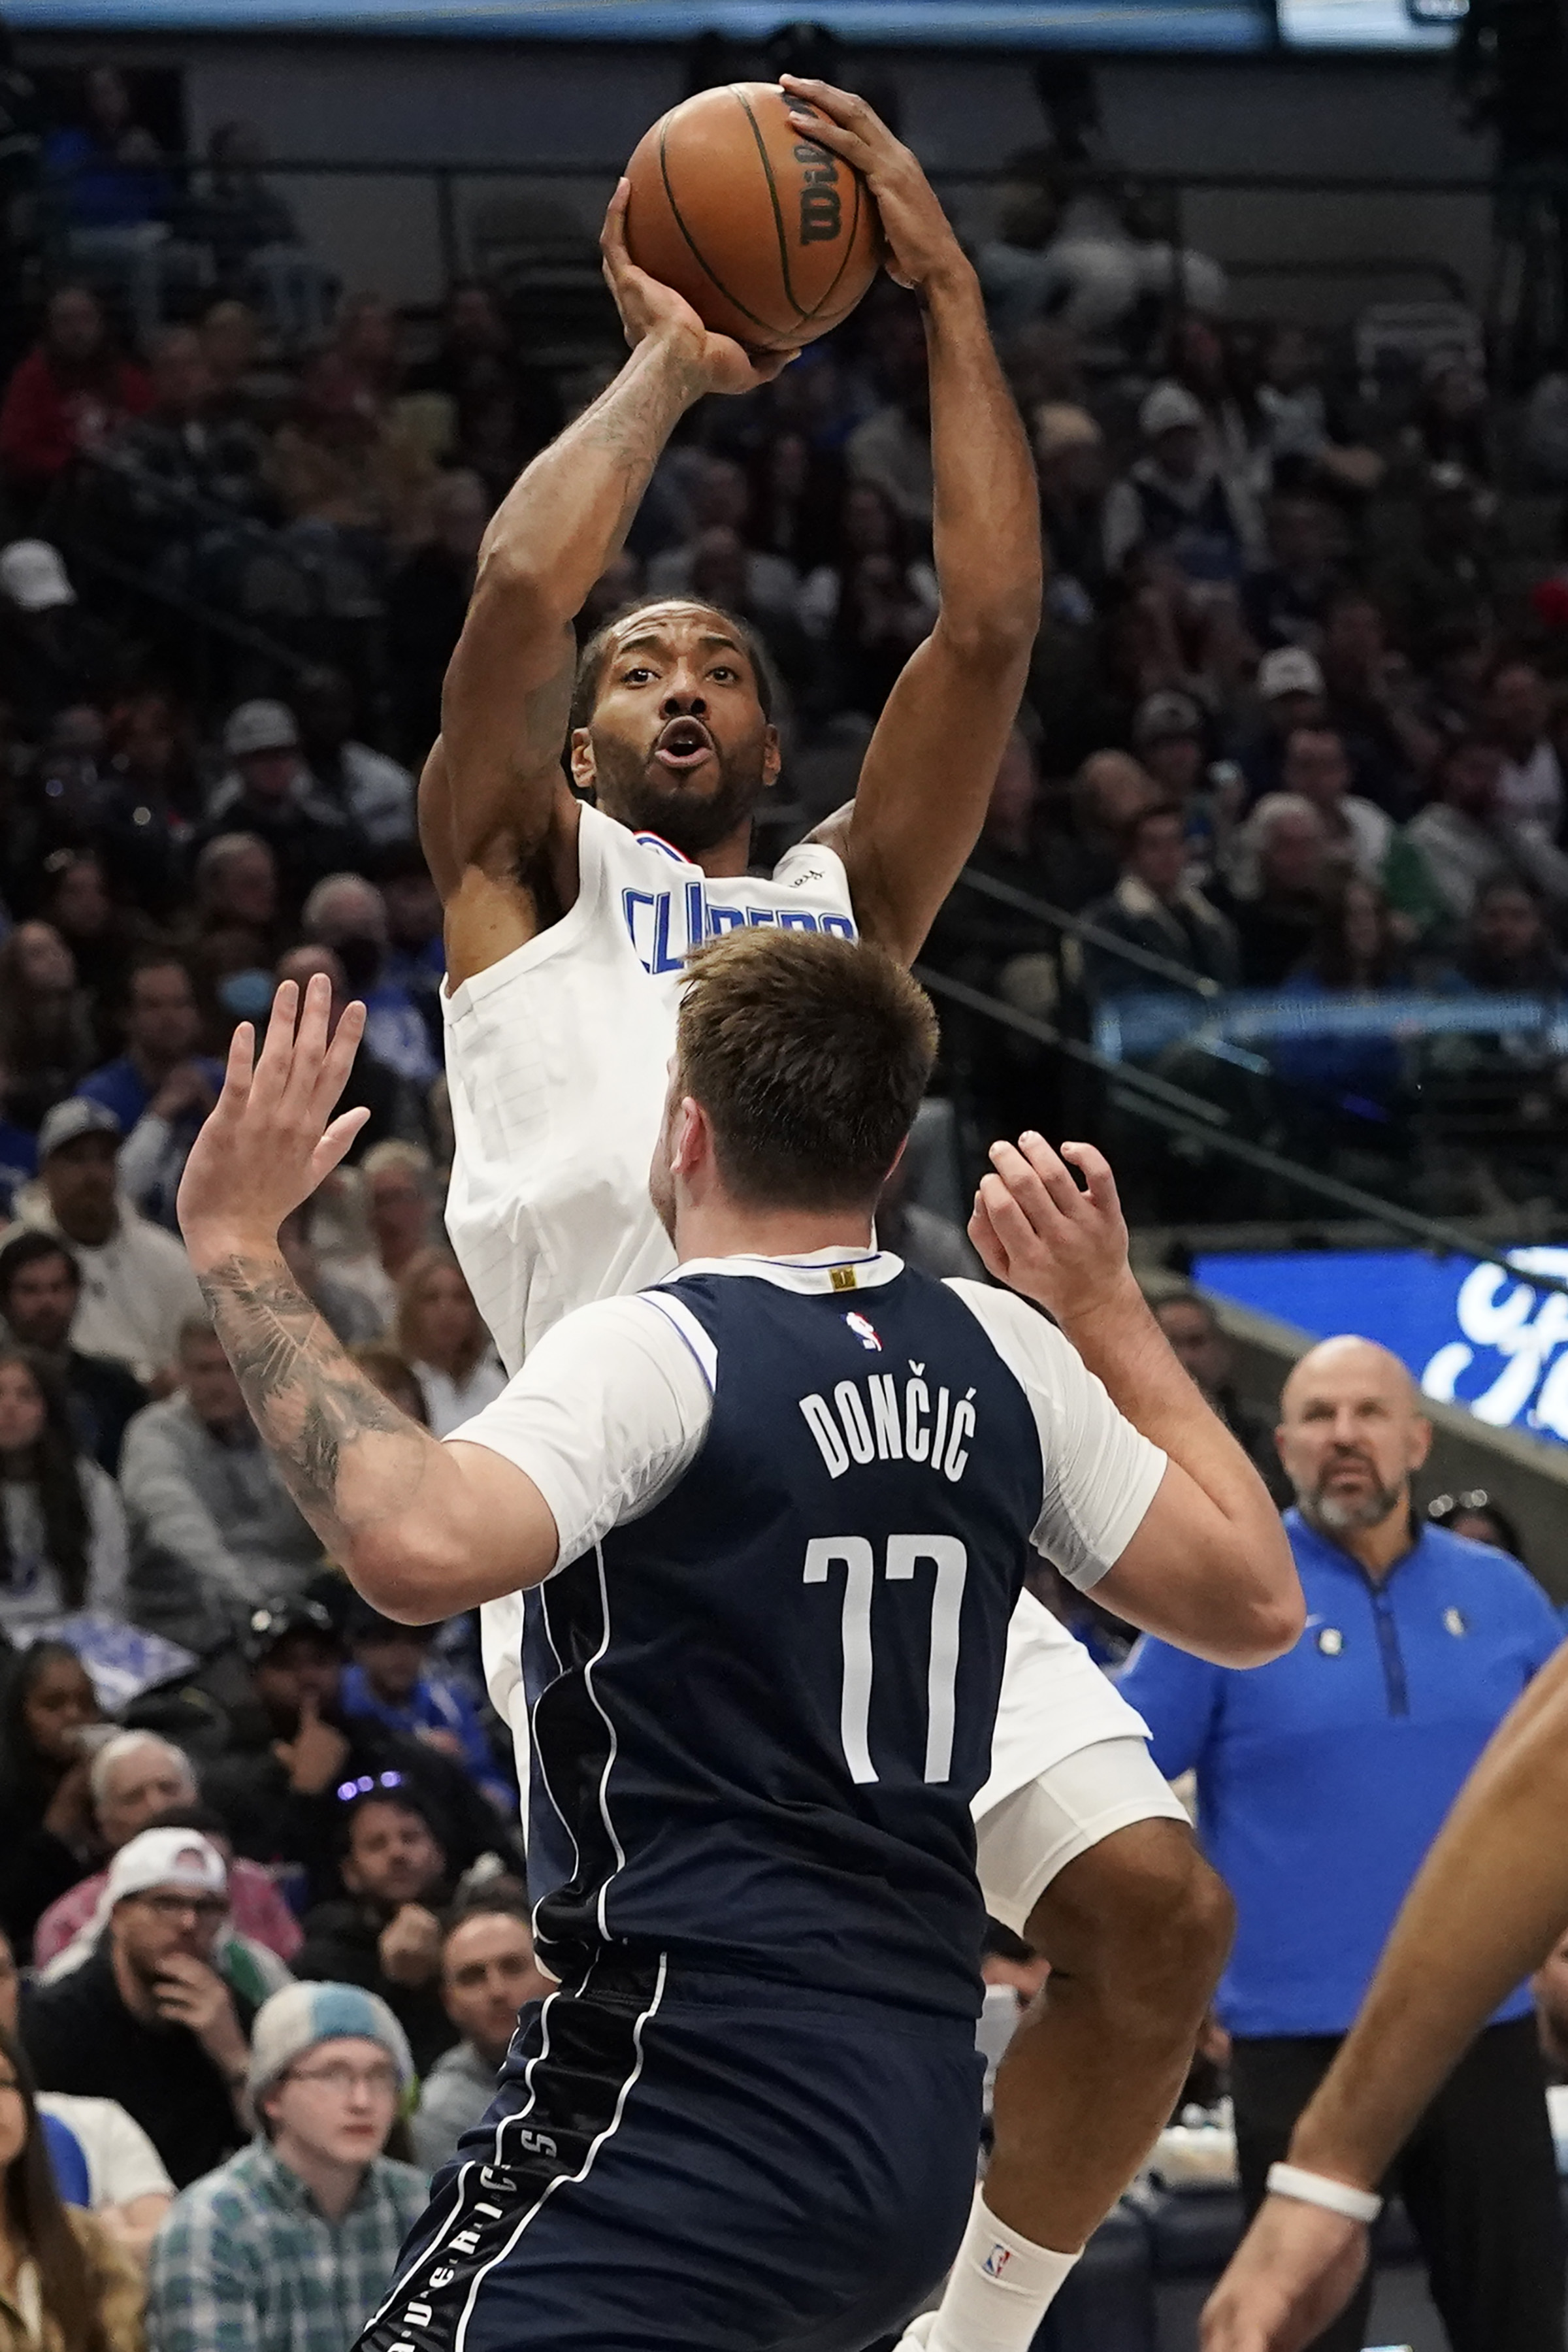 Dallas Cowboys: Mavs move tipoff time Sunday to avoid conflict